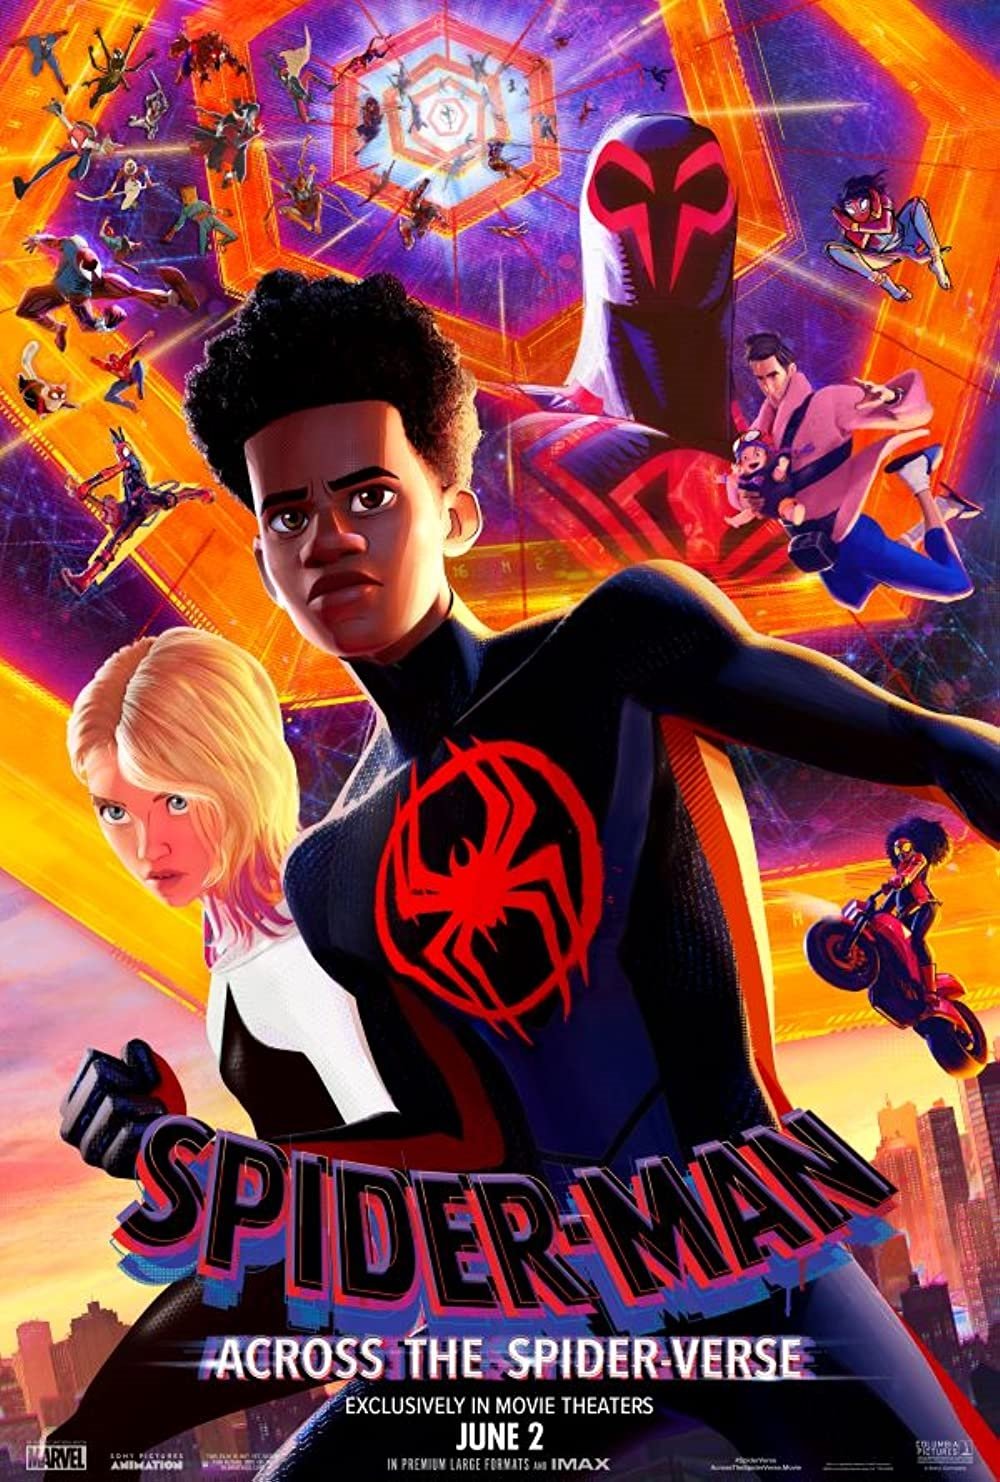 CD Shop - ANIMATION SPIDER-MAN - ACROSS THE SPIDER-VERSE